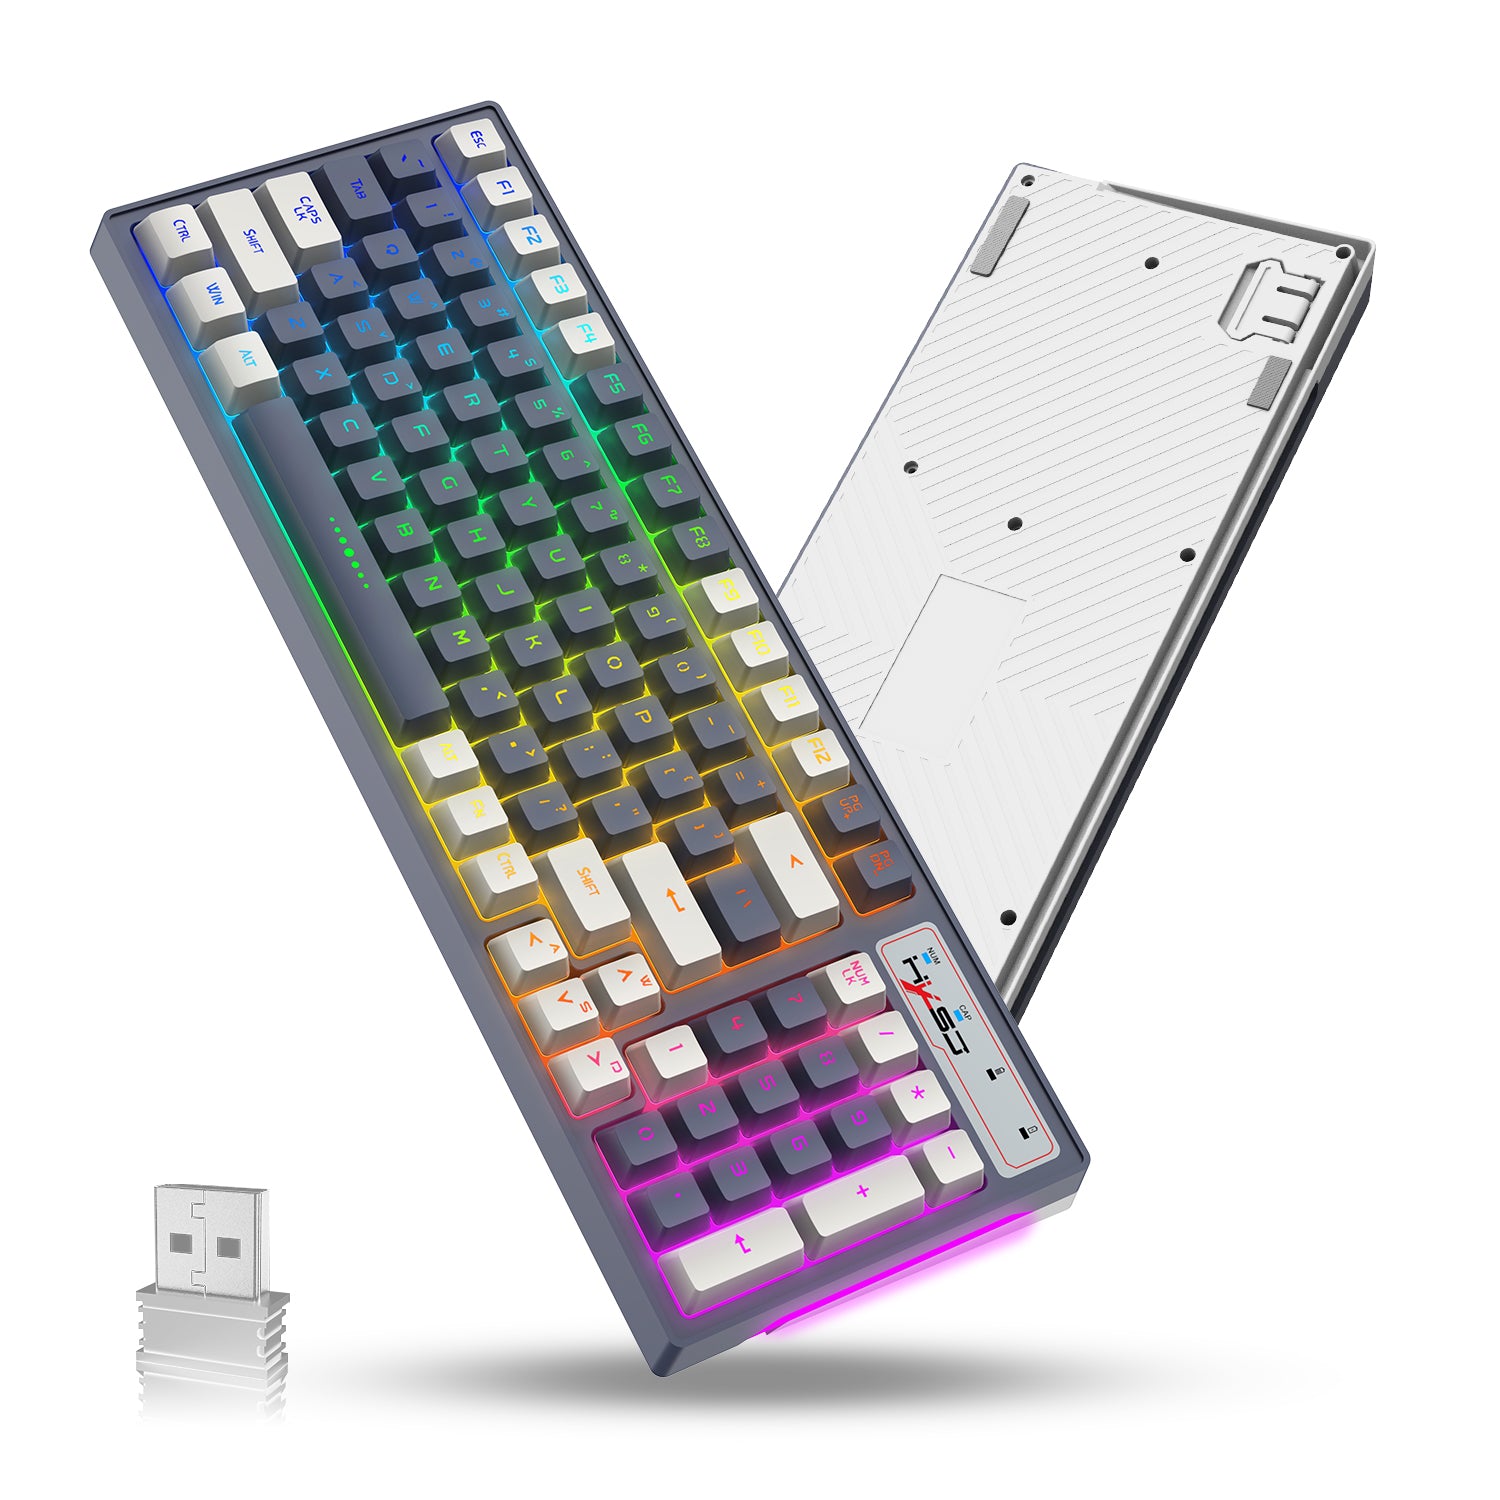 HXSJ L900 Wireless Gaming Keyboard, 2.4G Rechargeable Keyboard, 96-Key Compact-LG915, White Gray Mixed Color Keycaps,12 RGB Backlit, Full Anti-ghosting, Mechanical Feel for PC, Mac, PS4, Xbox